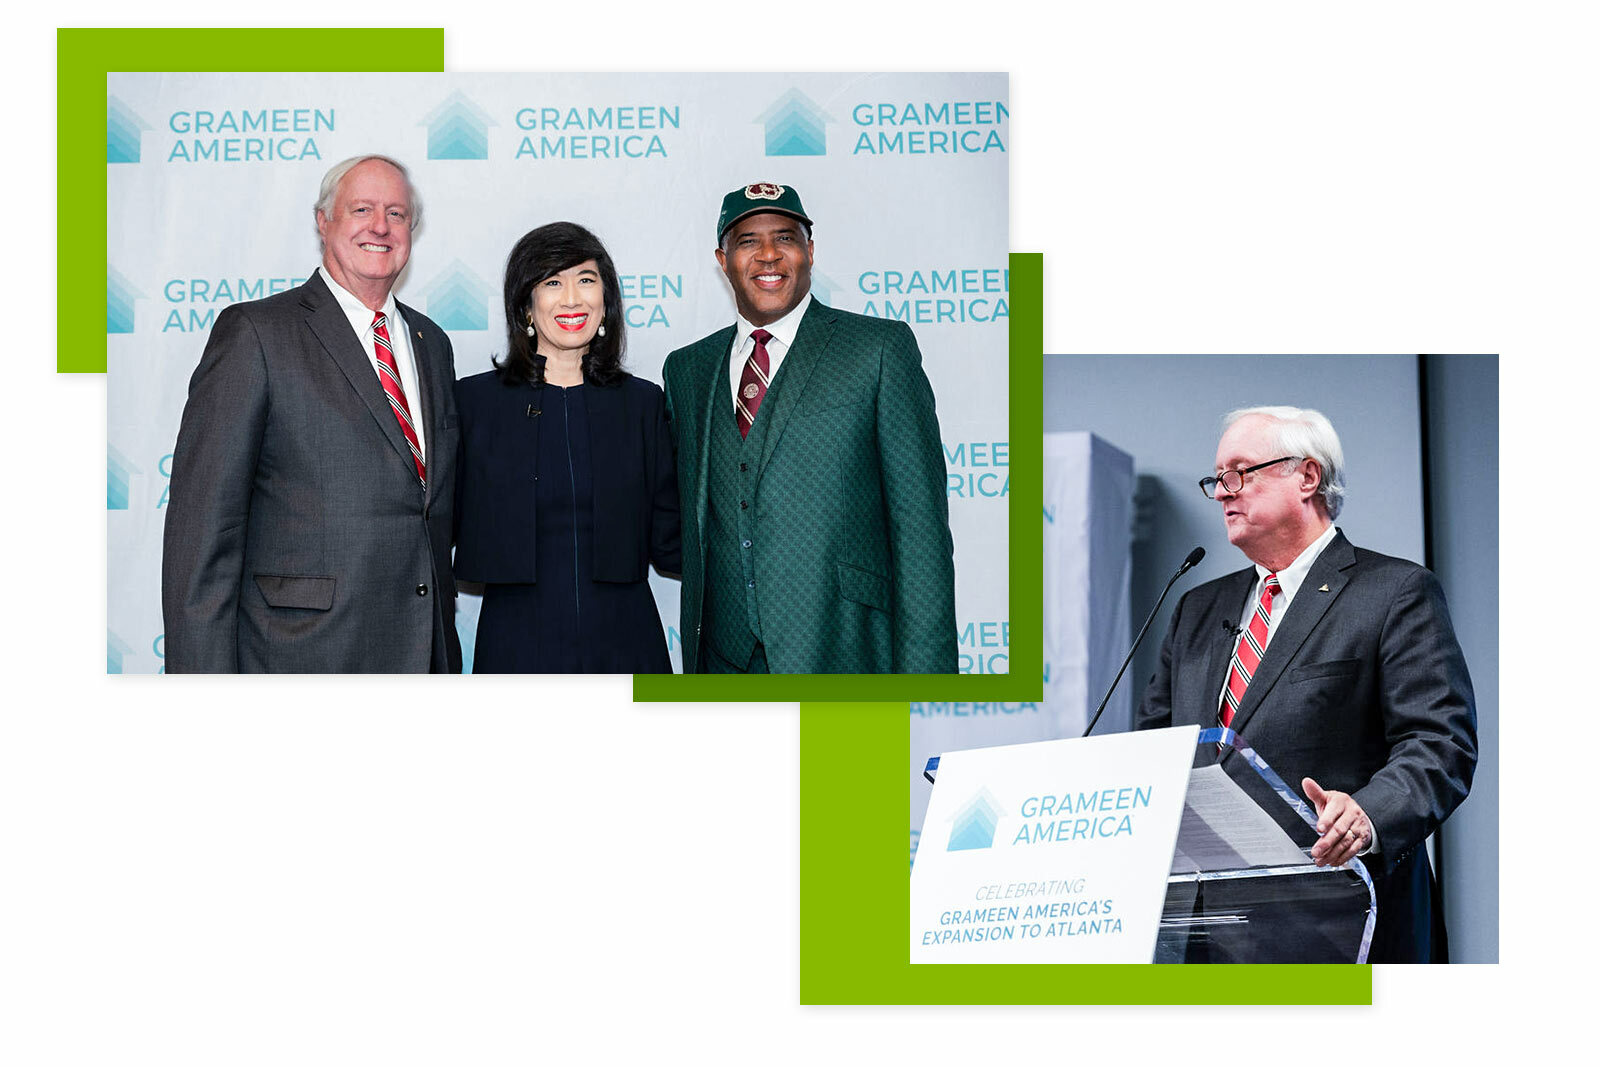 Grameen America Event collage - three people in front of the wall with logos and a presenter at the event